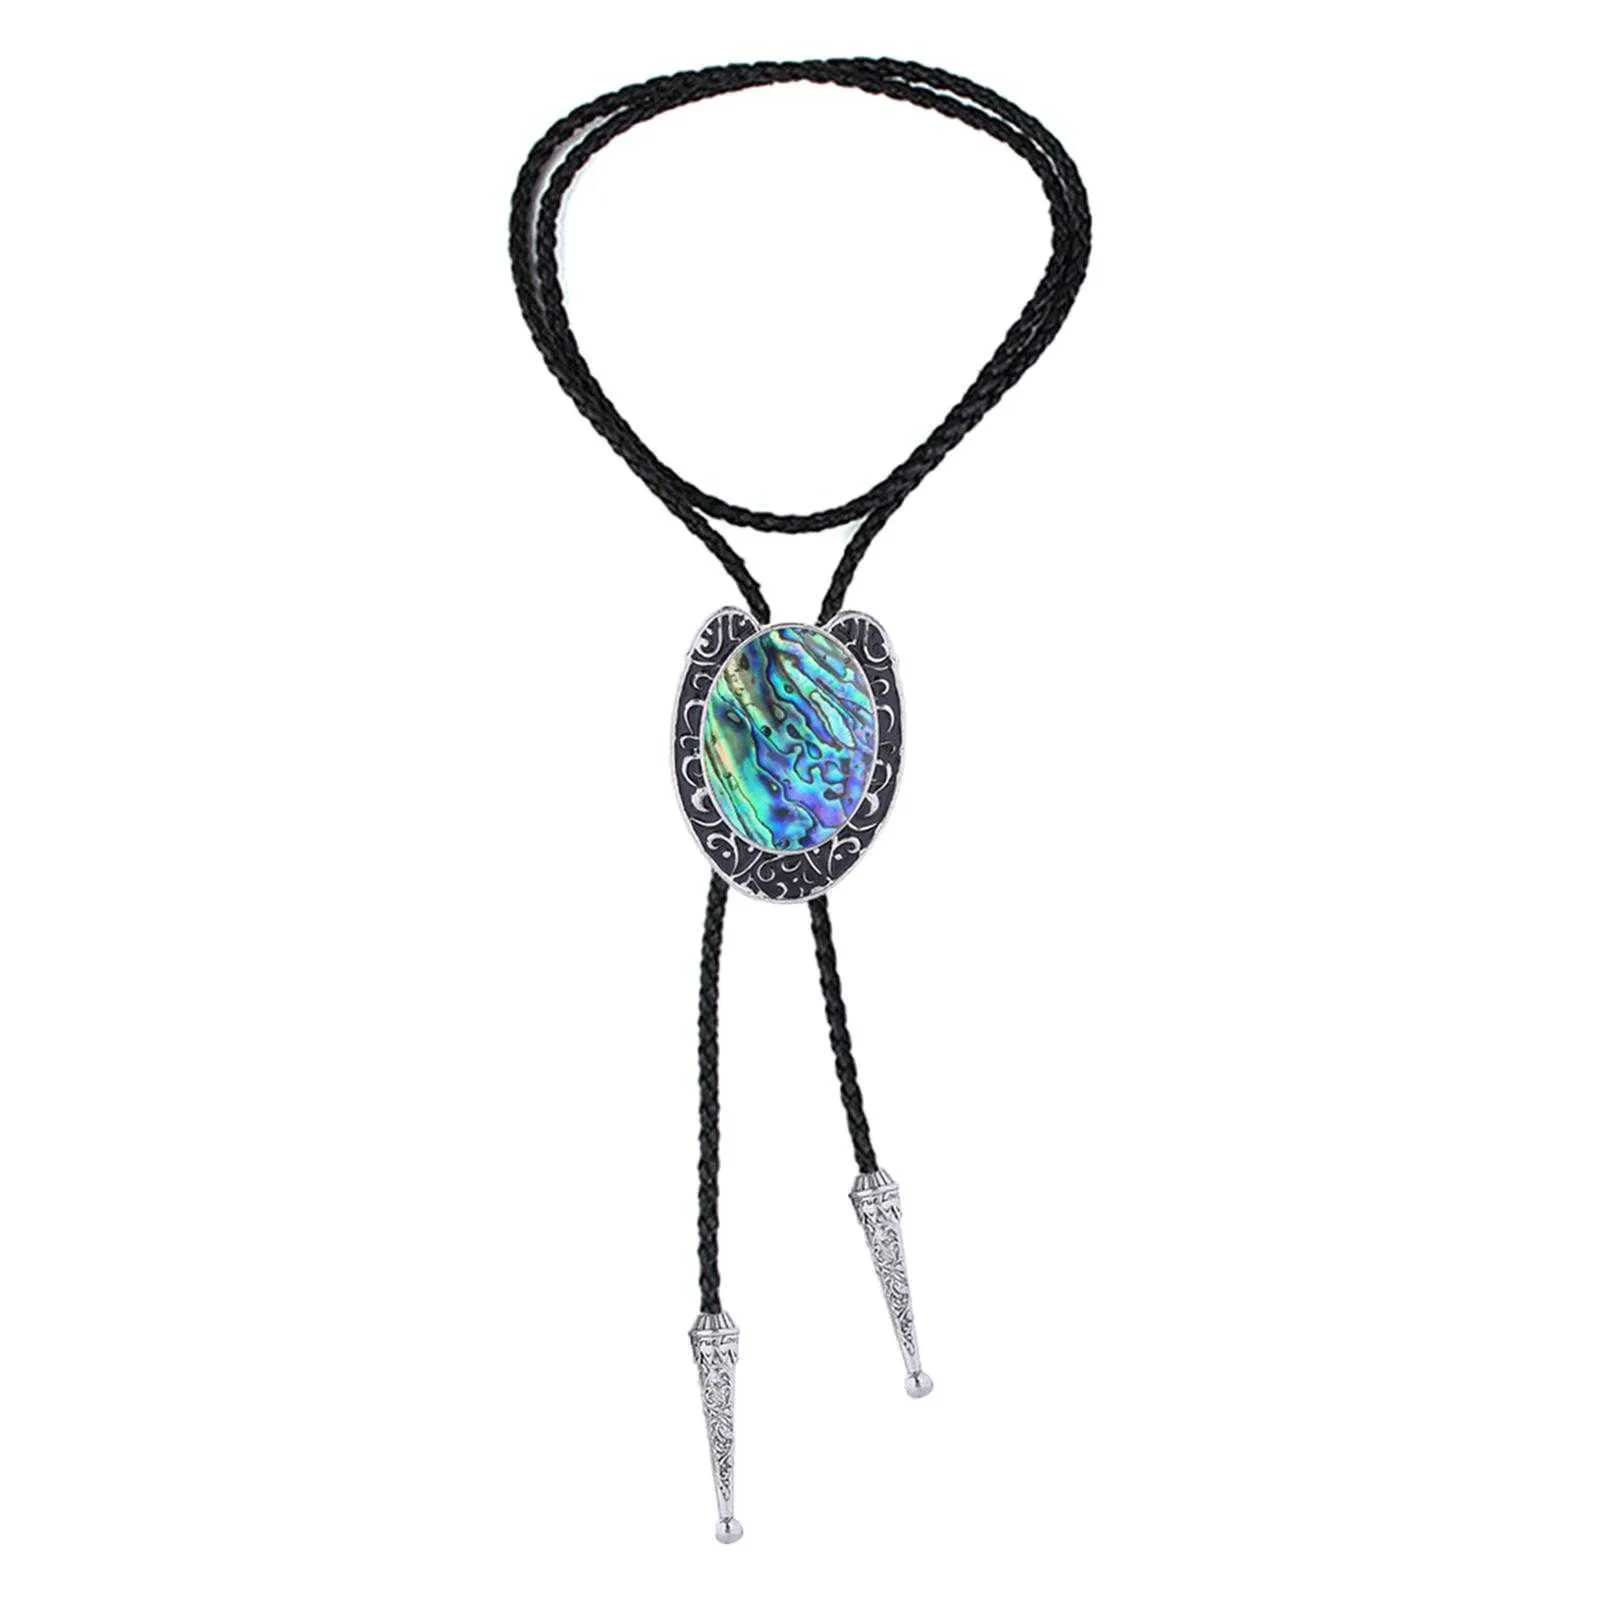 Vintage Style Bolo Tie Shirt Neck Ties Costume Accessories with Pendant Adjustable Rope for Women Teens Men Adults Birthday Gift